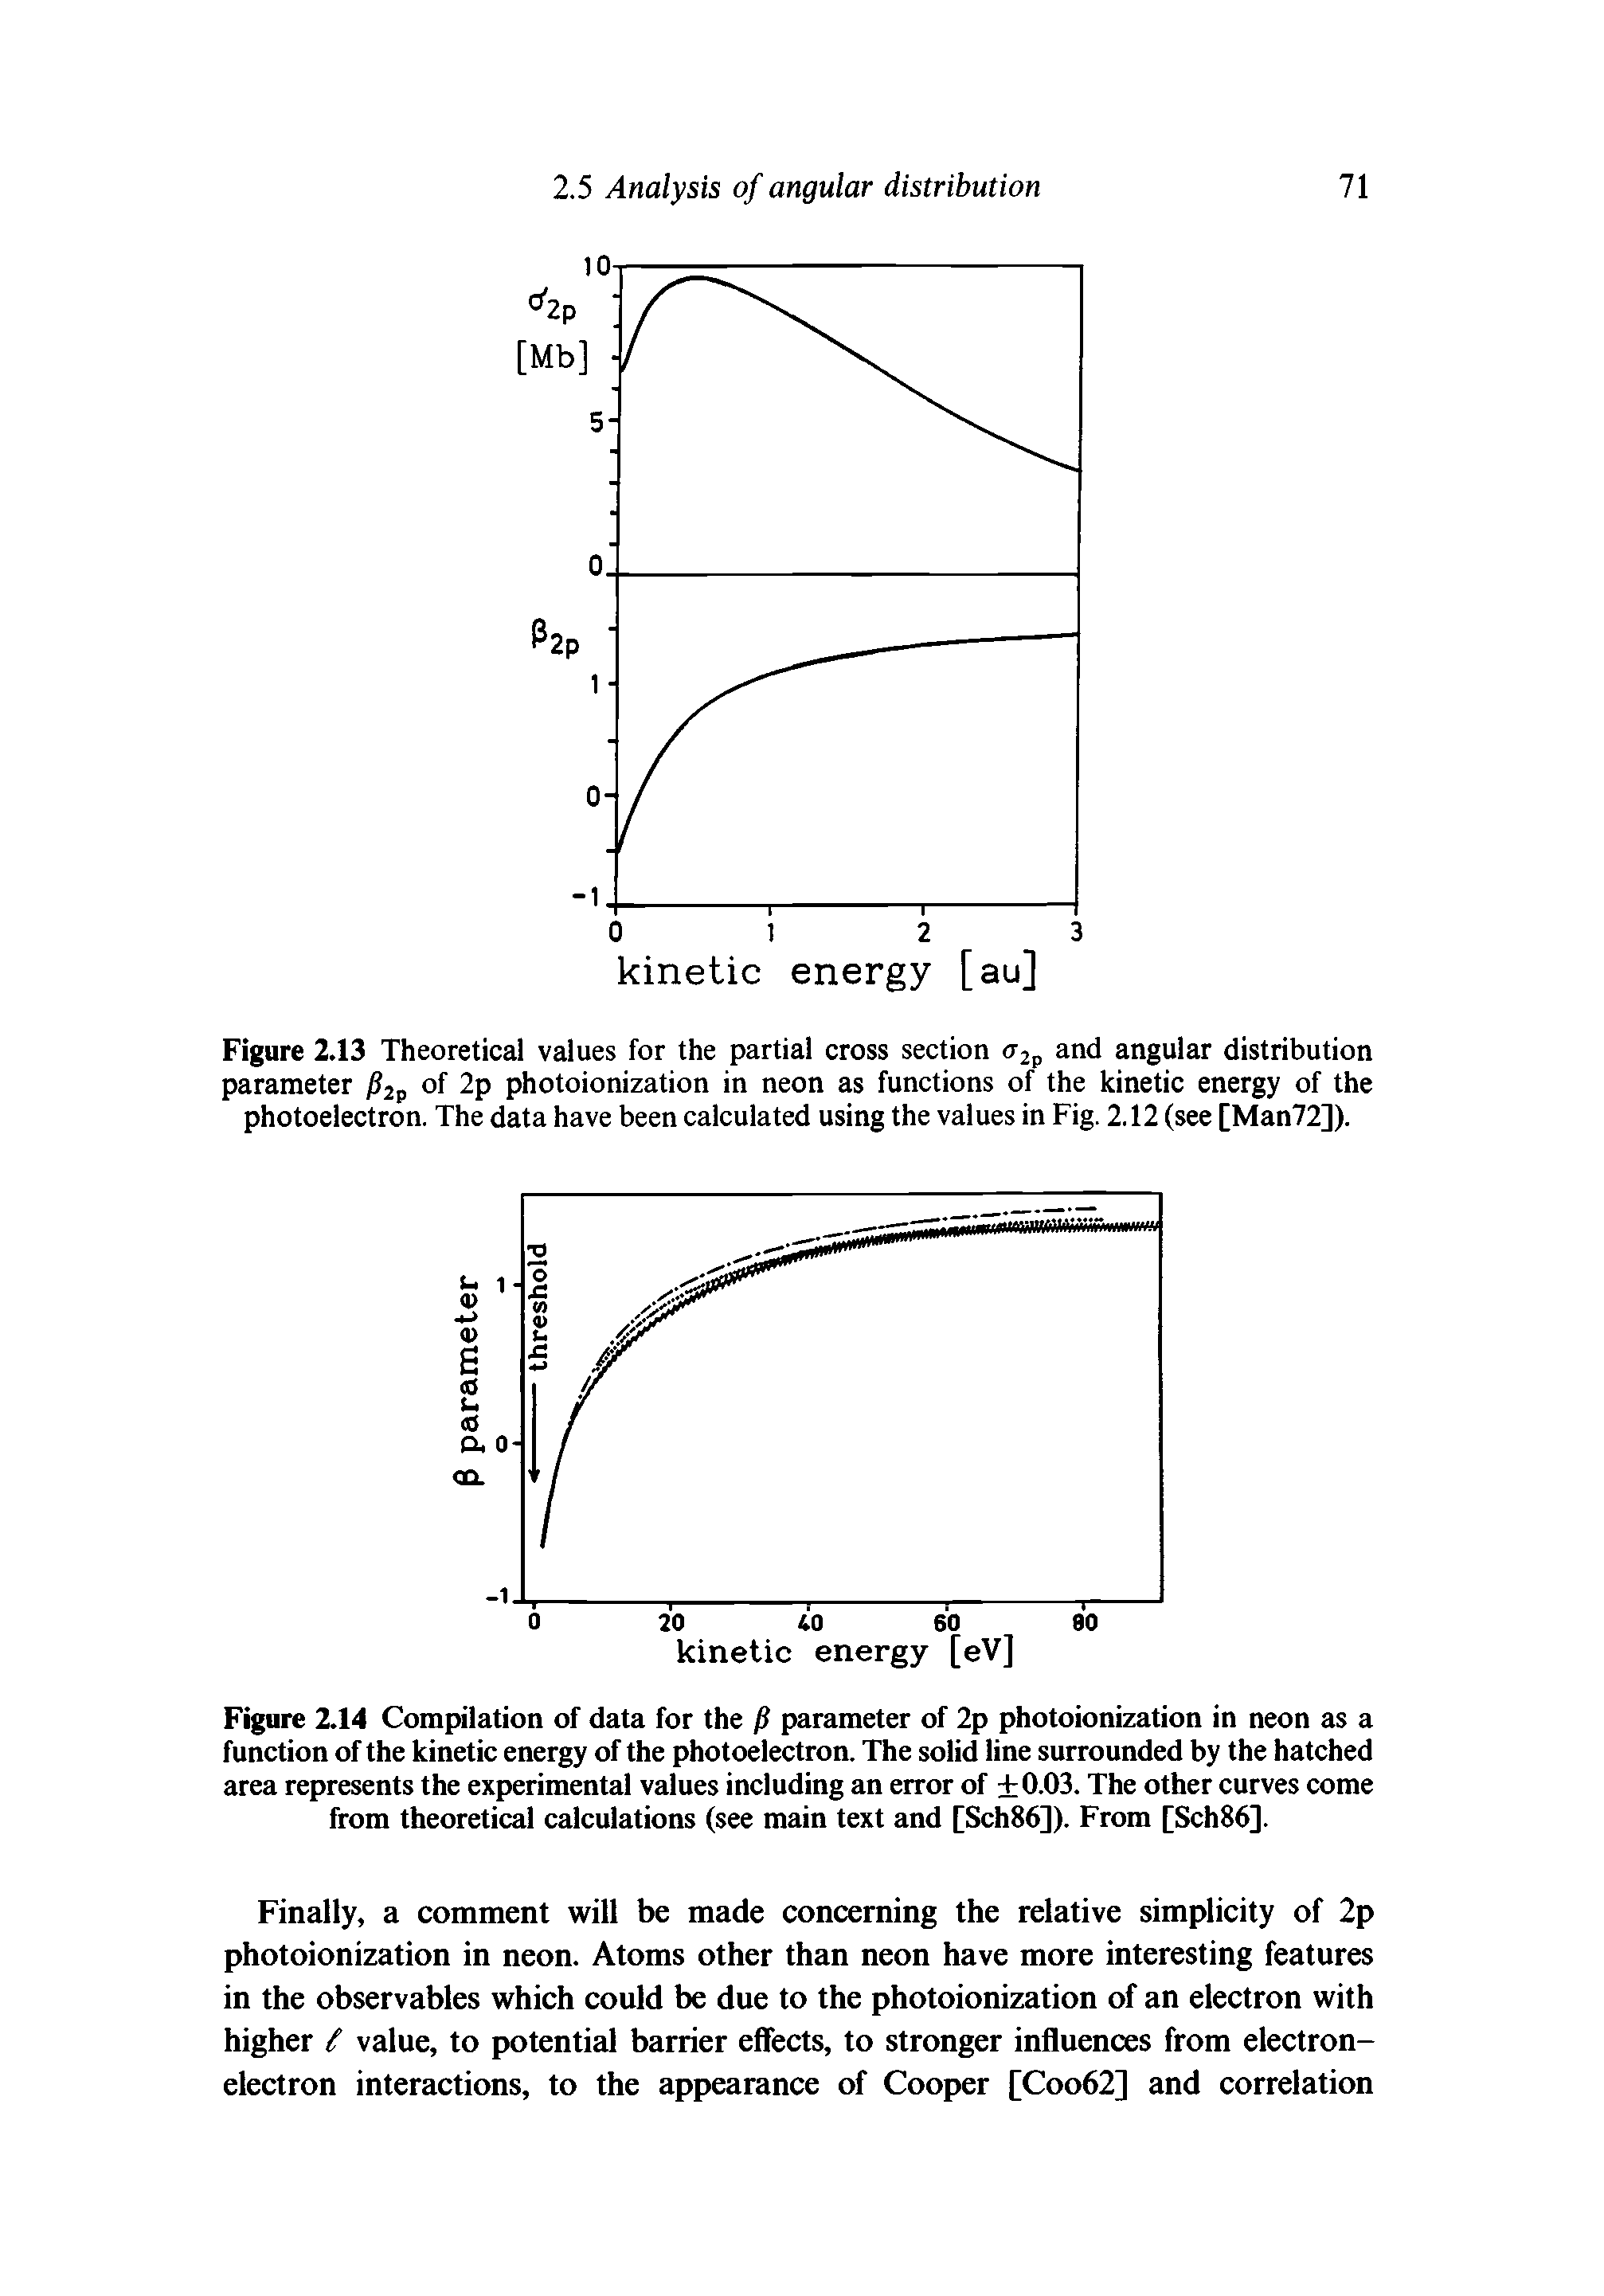 Figure 2.13 Theoretical values for the partial cross section <r2p and angular distribution parameter / 2p of 2p photoionization in neon as functions of the kinetic energy of the photoelectron. The data have been calculated using the values in Fig. 2.12 (see [Man72]).